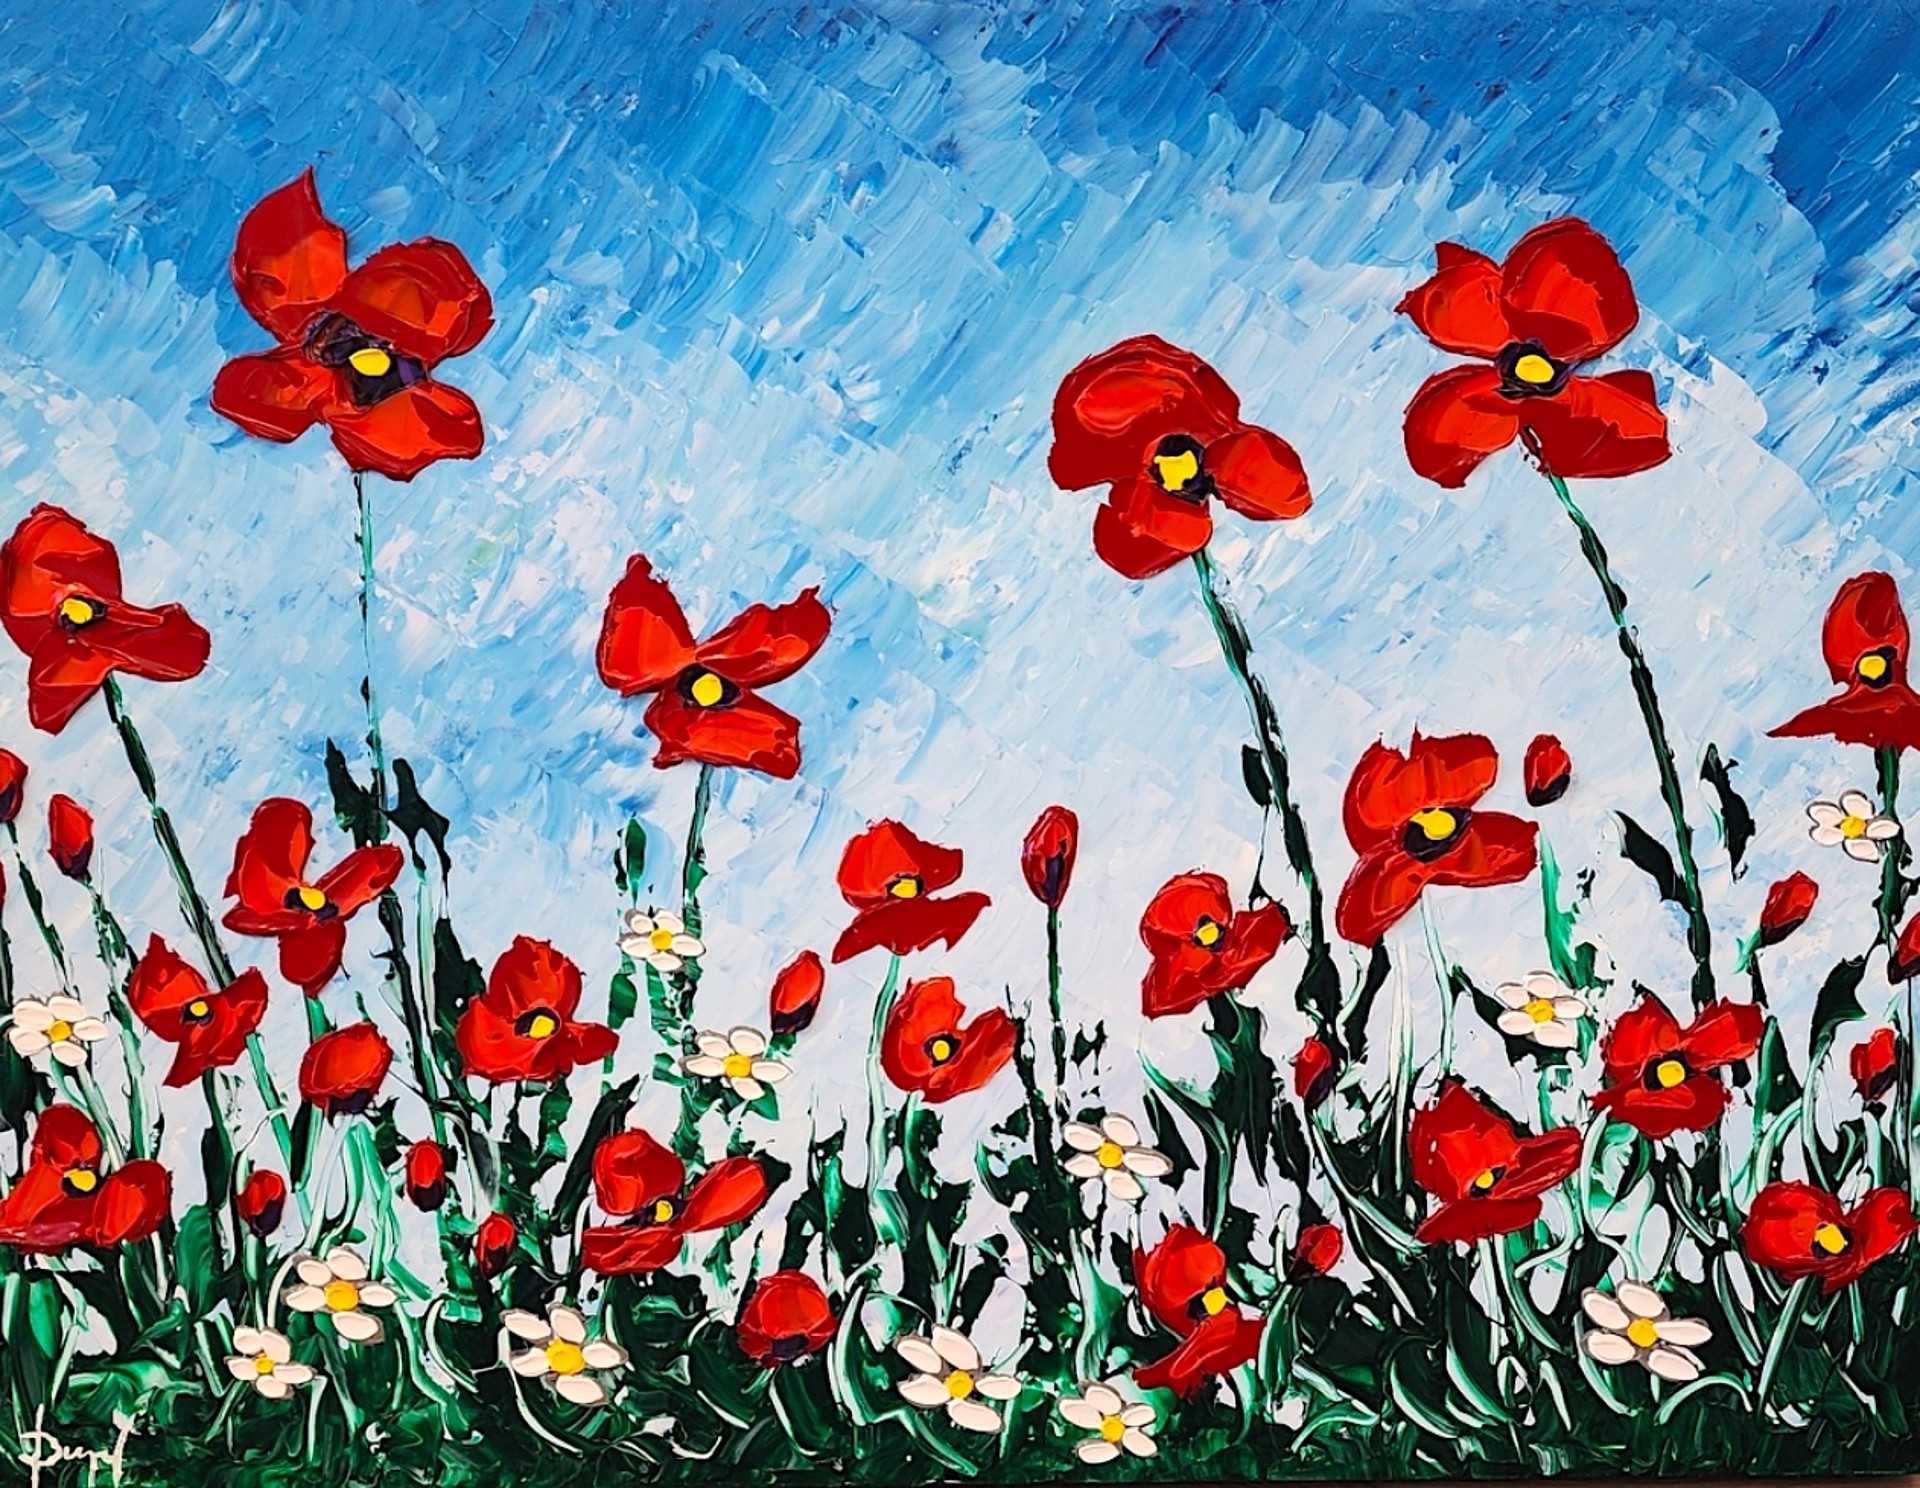 Spring Poppies of the Meadow by Isabelle Dupuy